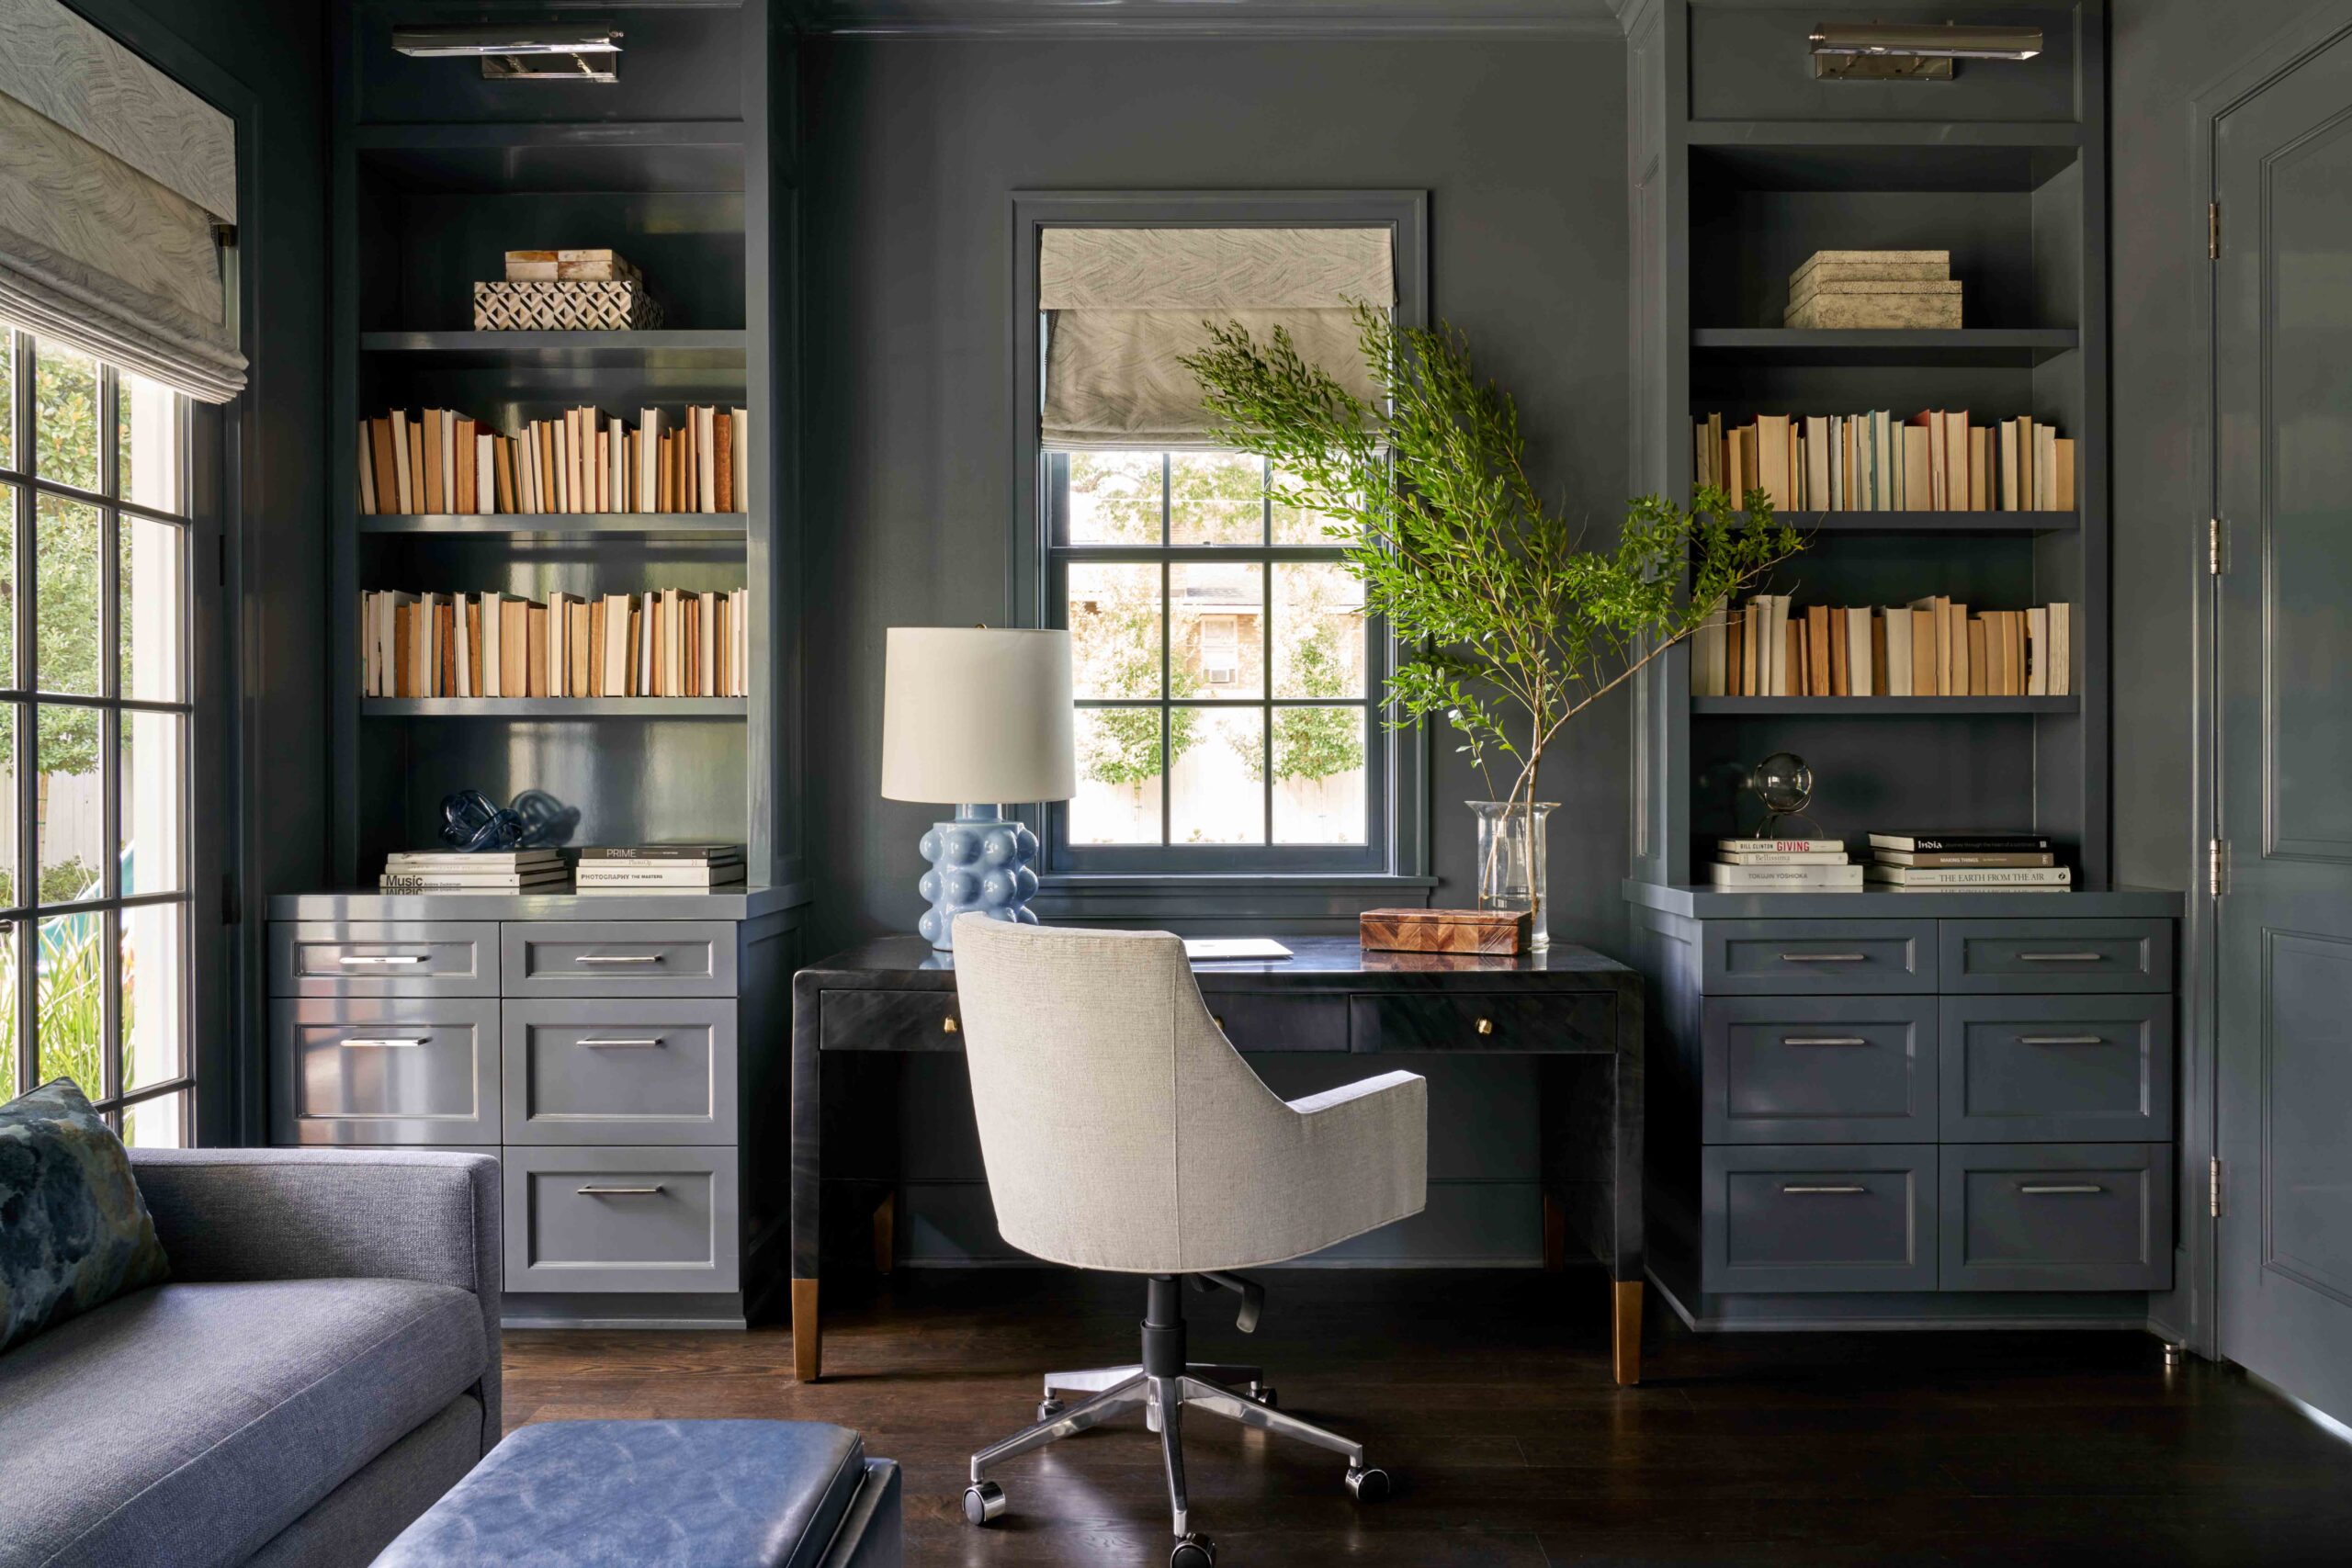 House Tour: Home Office - Driven by Decor